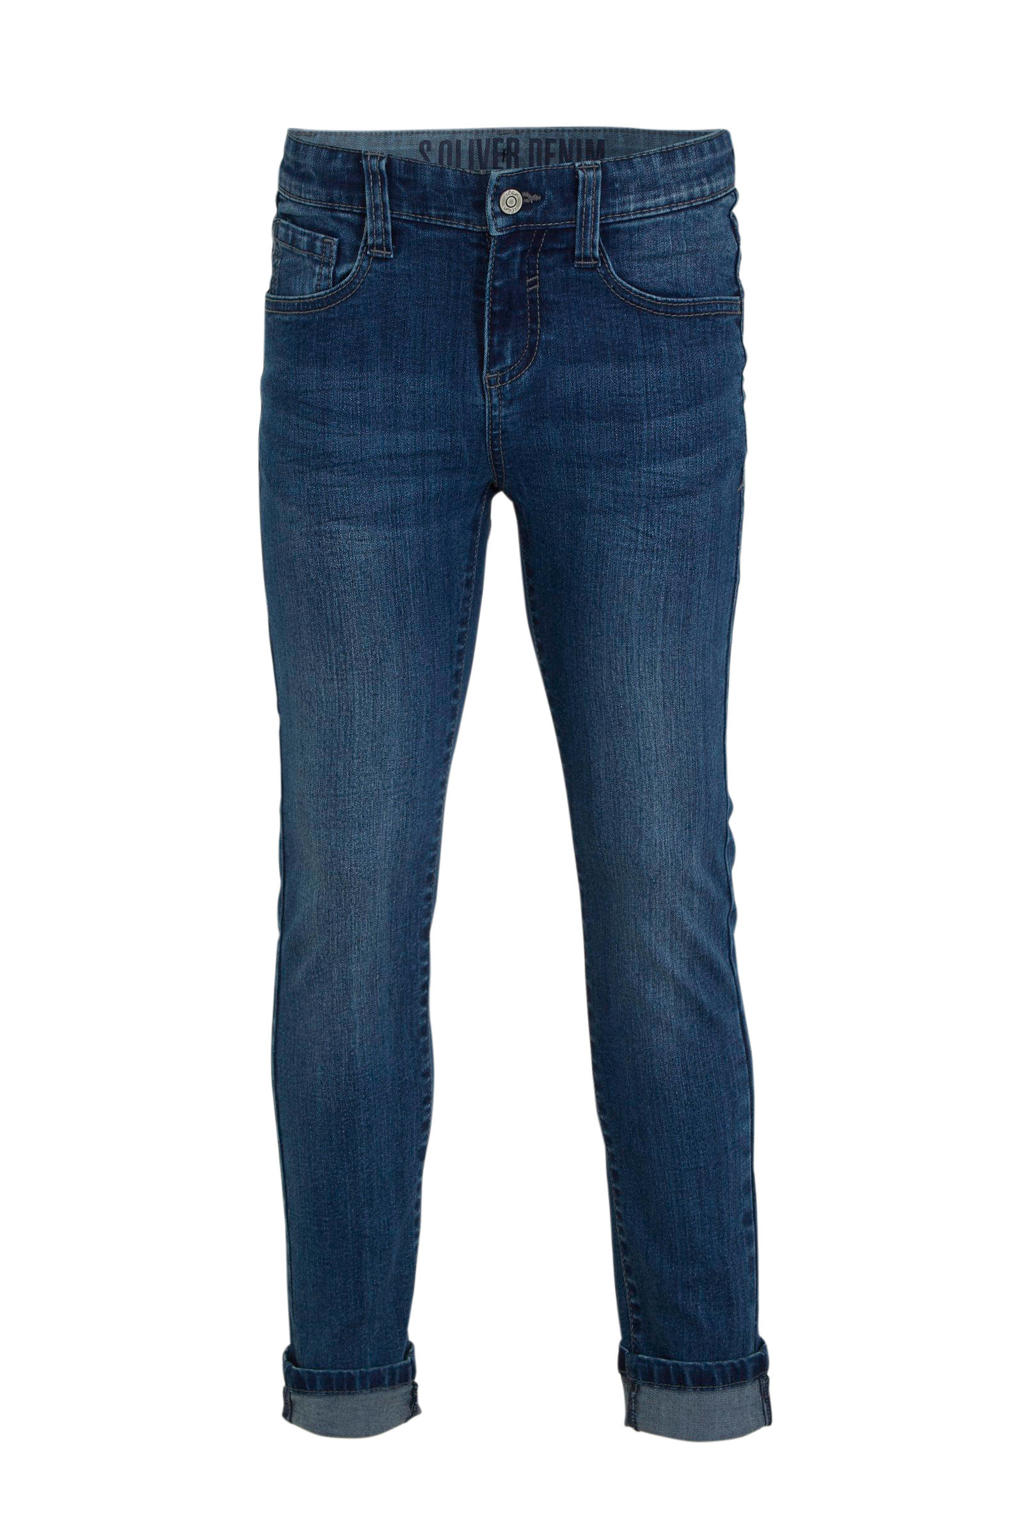 s.Oliver slim fit jeans donkerblauw